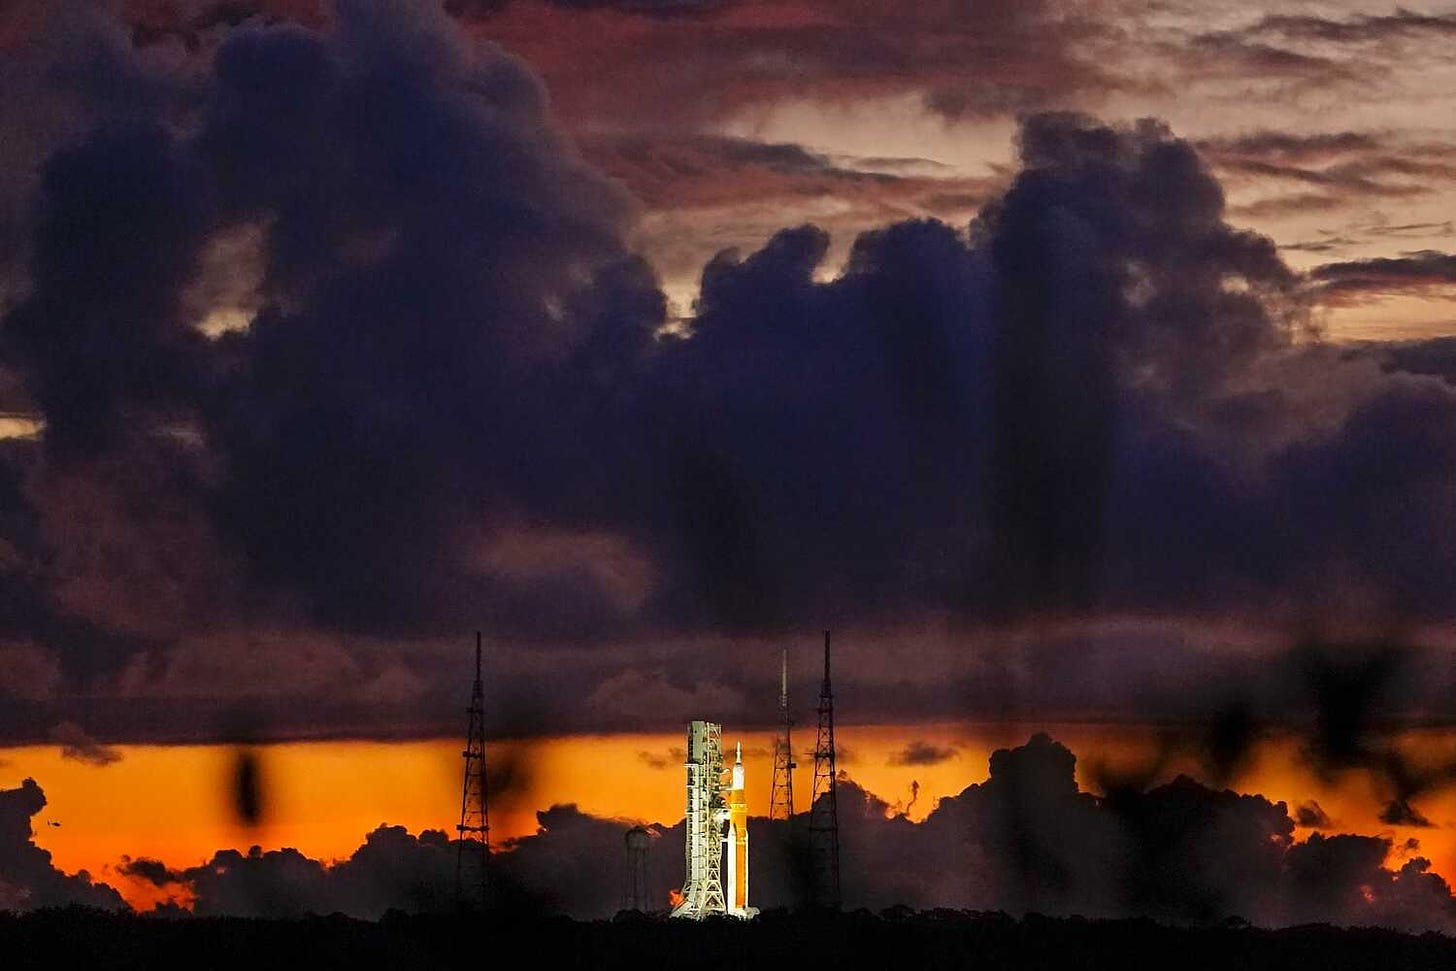 The Artemis I mission on the launchpad at Kennedy Space Center, at sunrise on Monday.